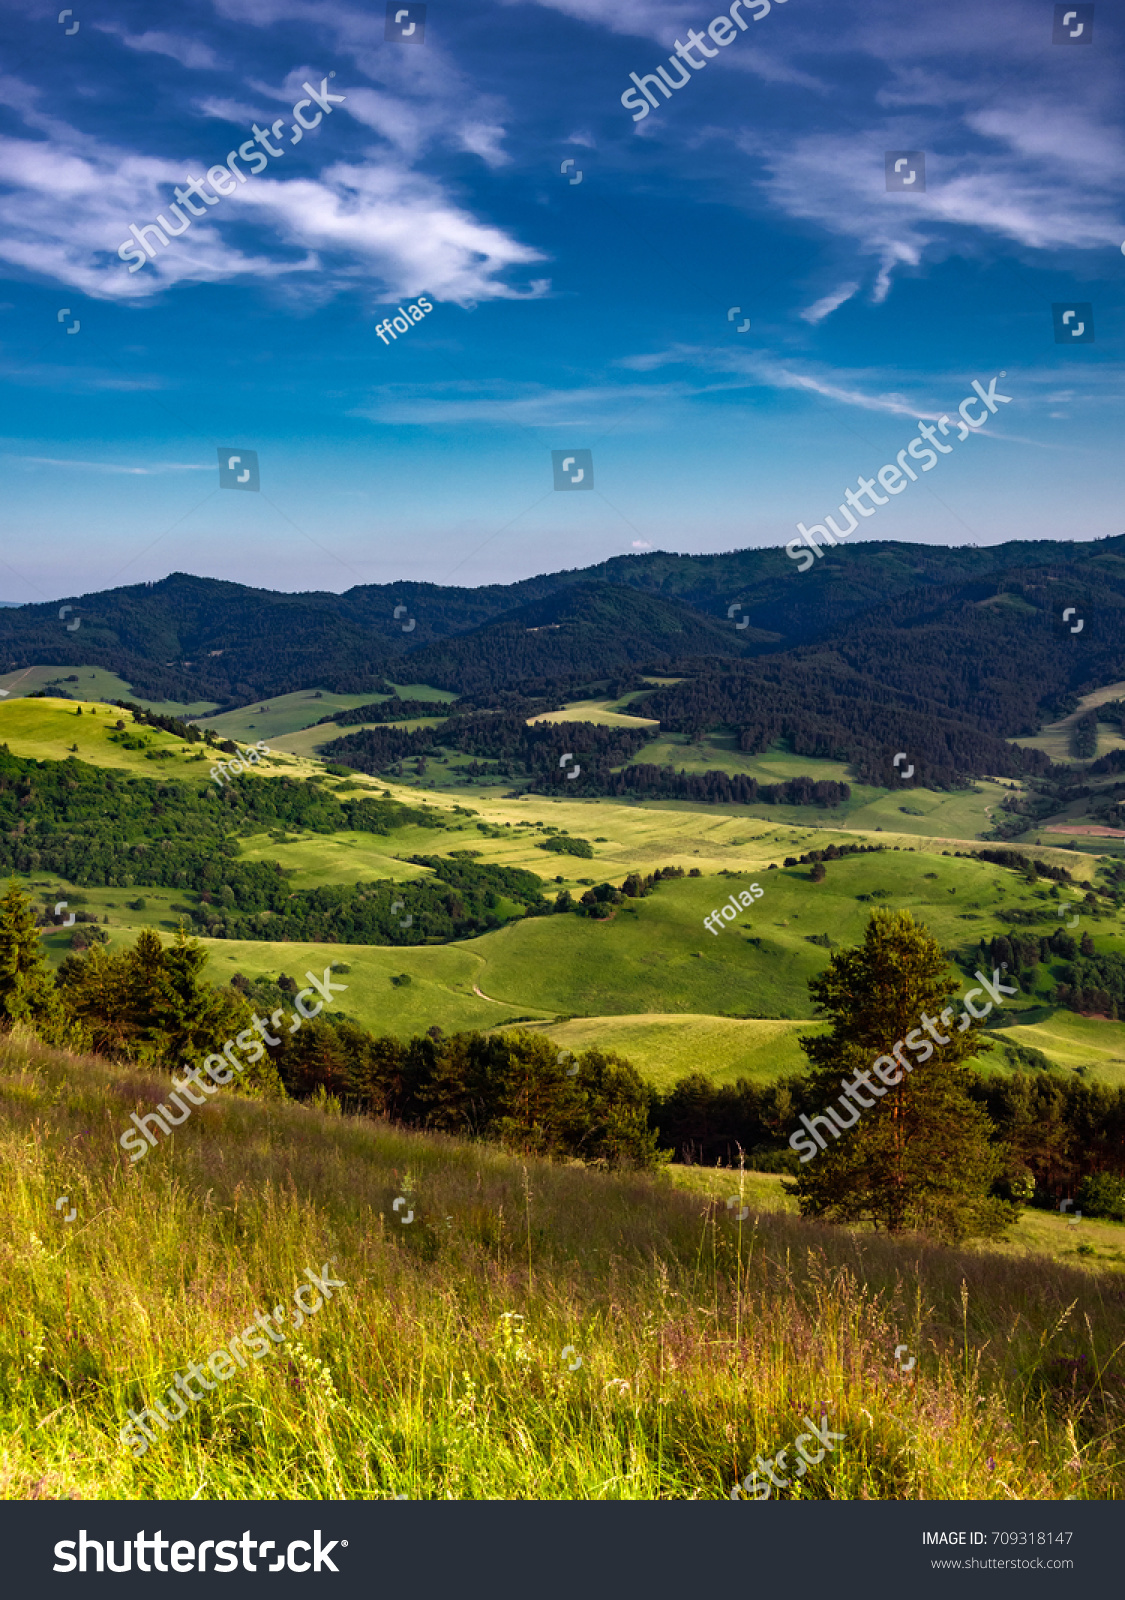 Valley between Spis Magura and Pieniny Mountains Range. View from Wysoki Wierch (Slachtovsky) Mount. #709318147